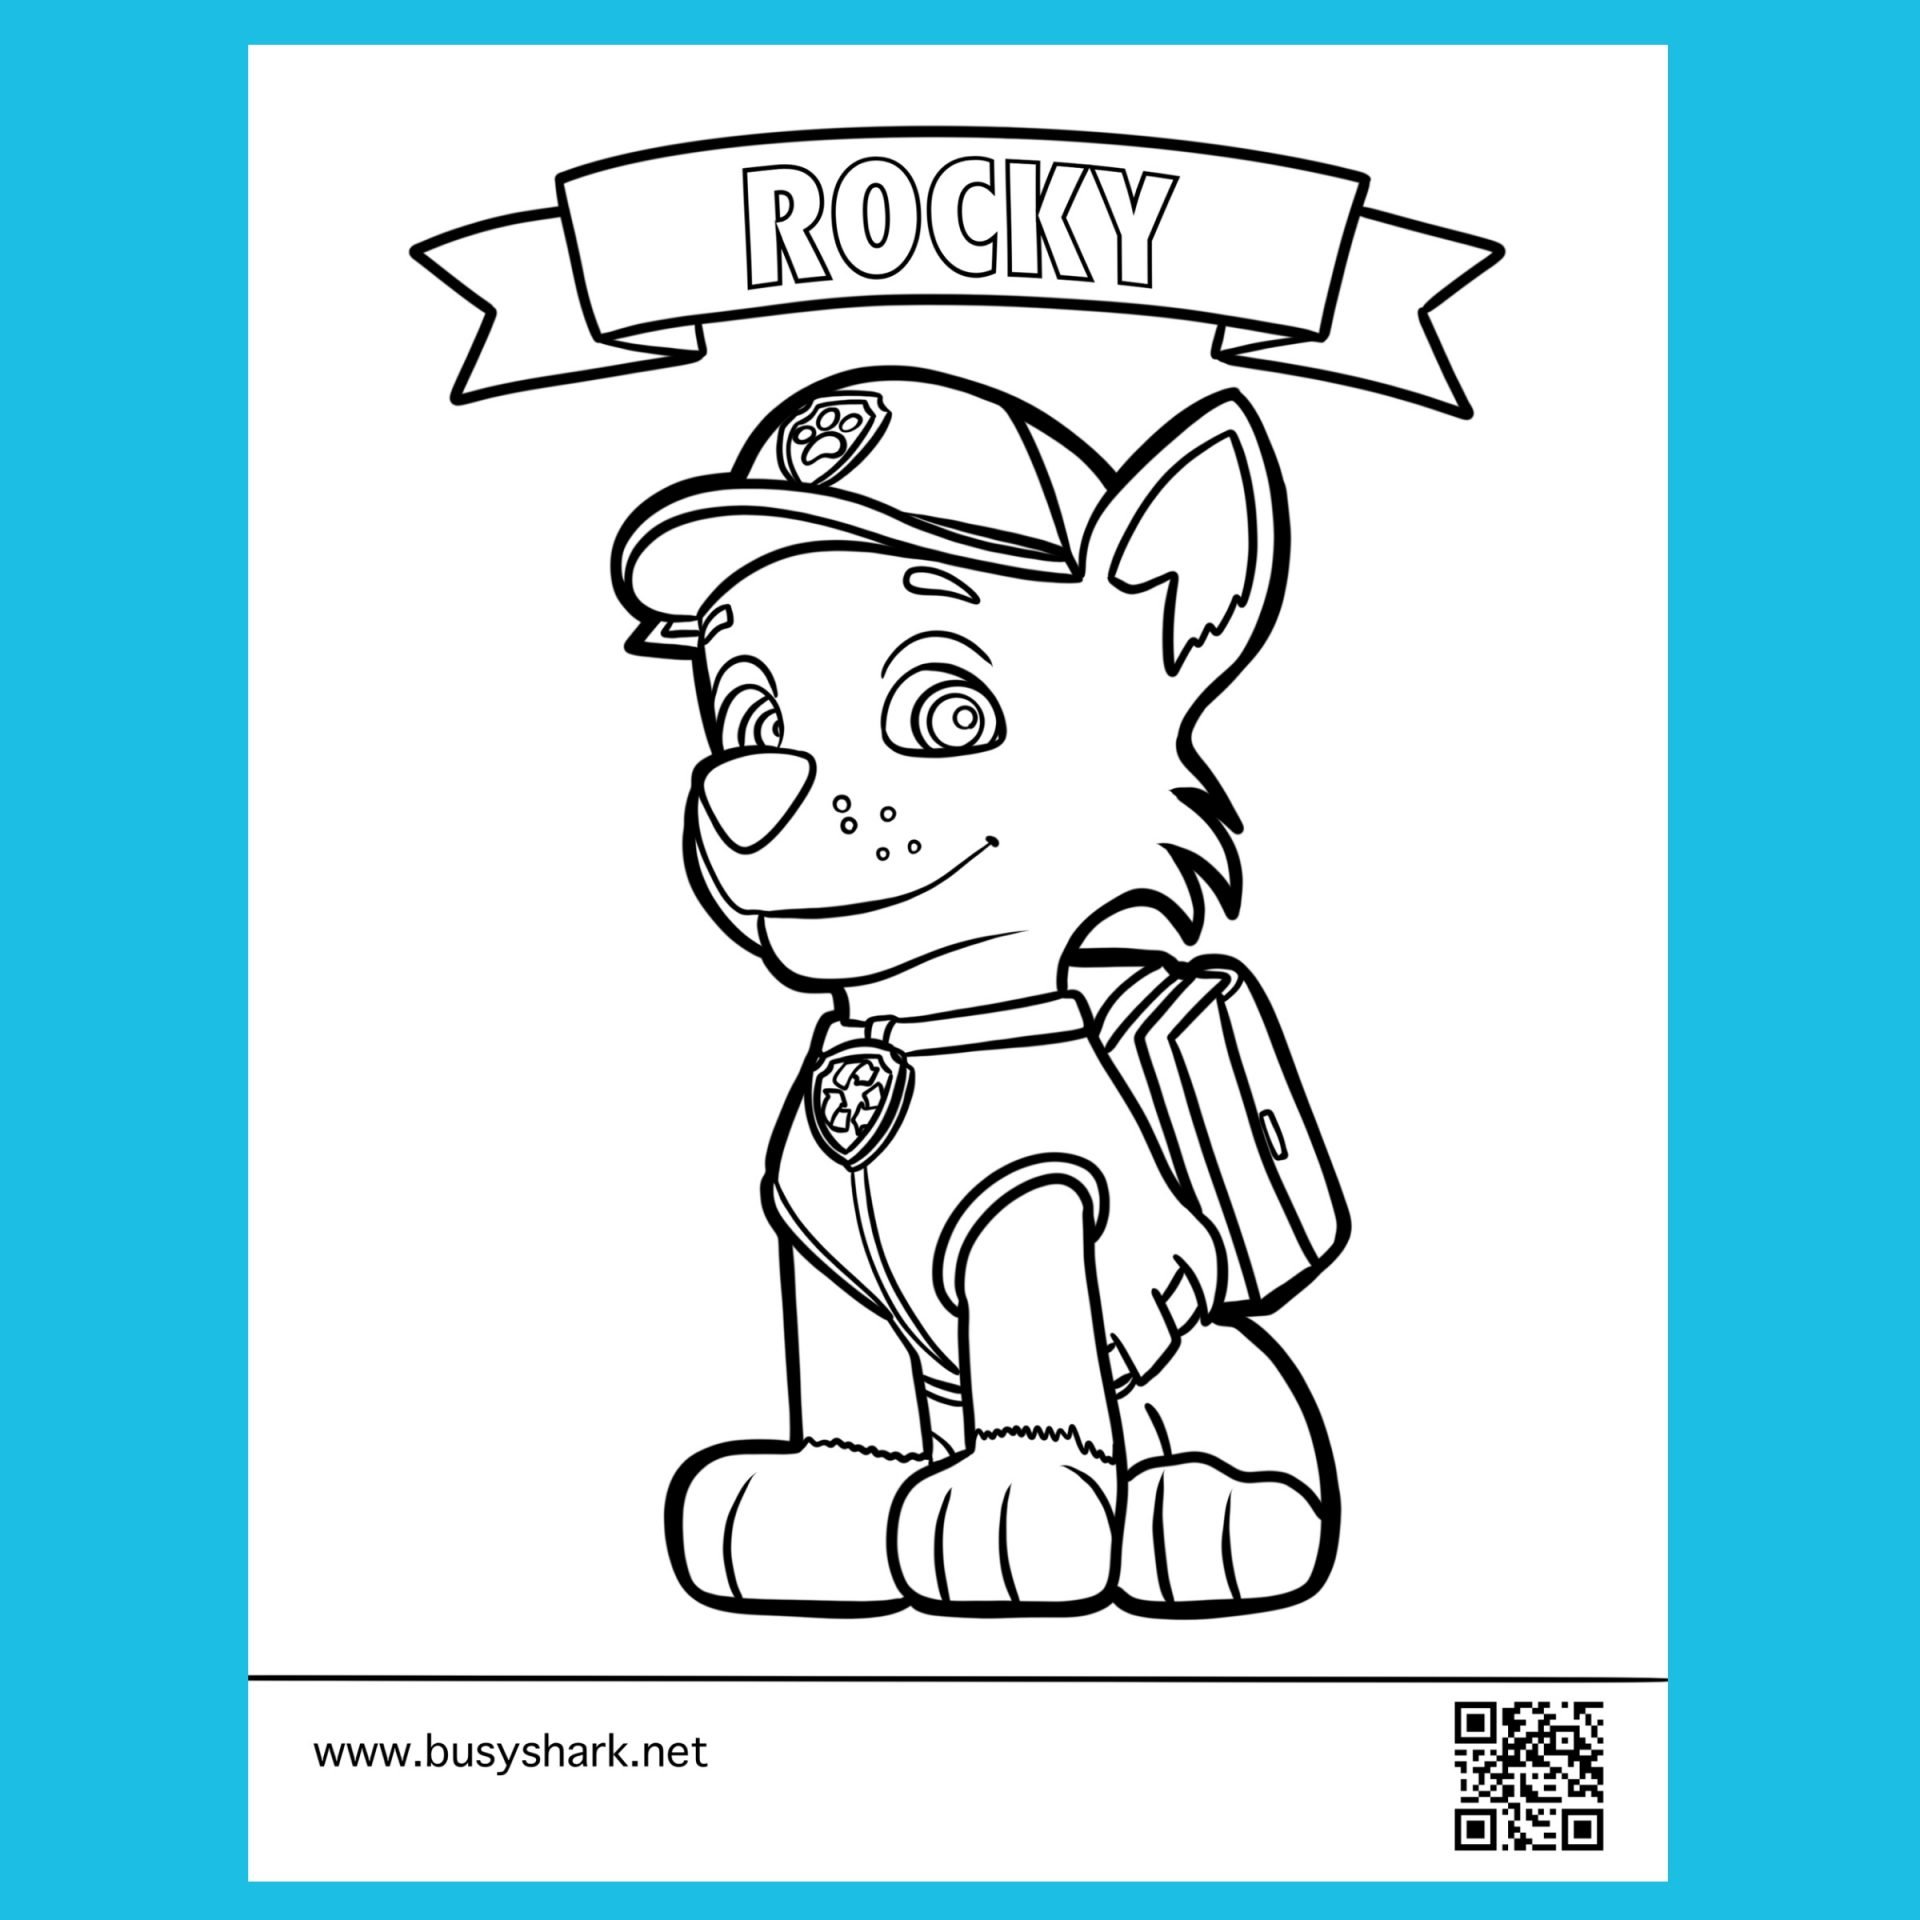 Paw patrol rocky free coloring page